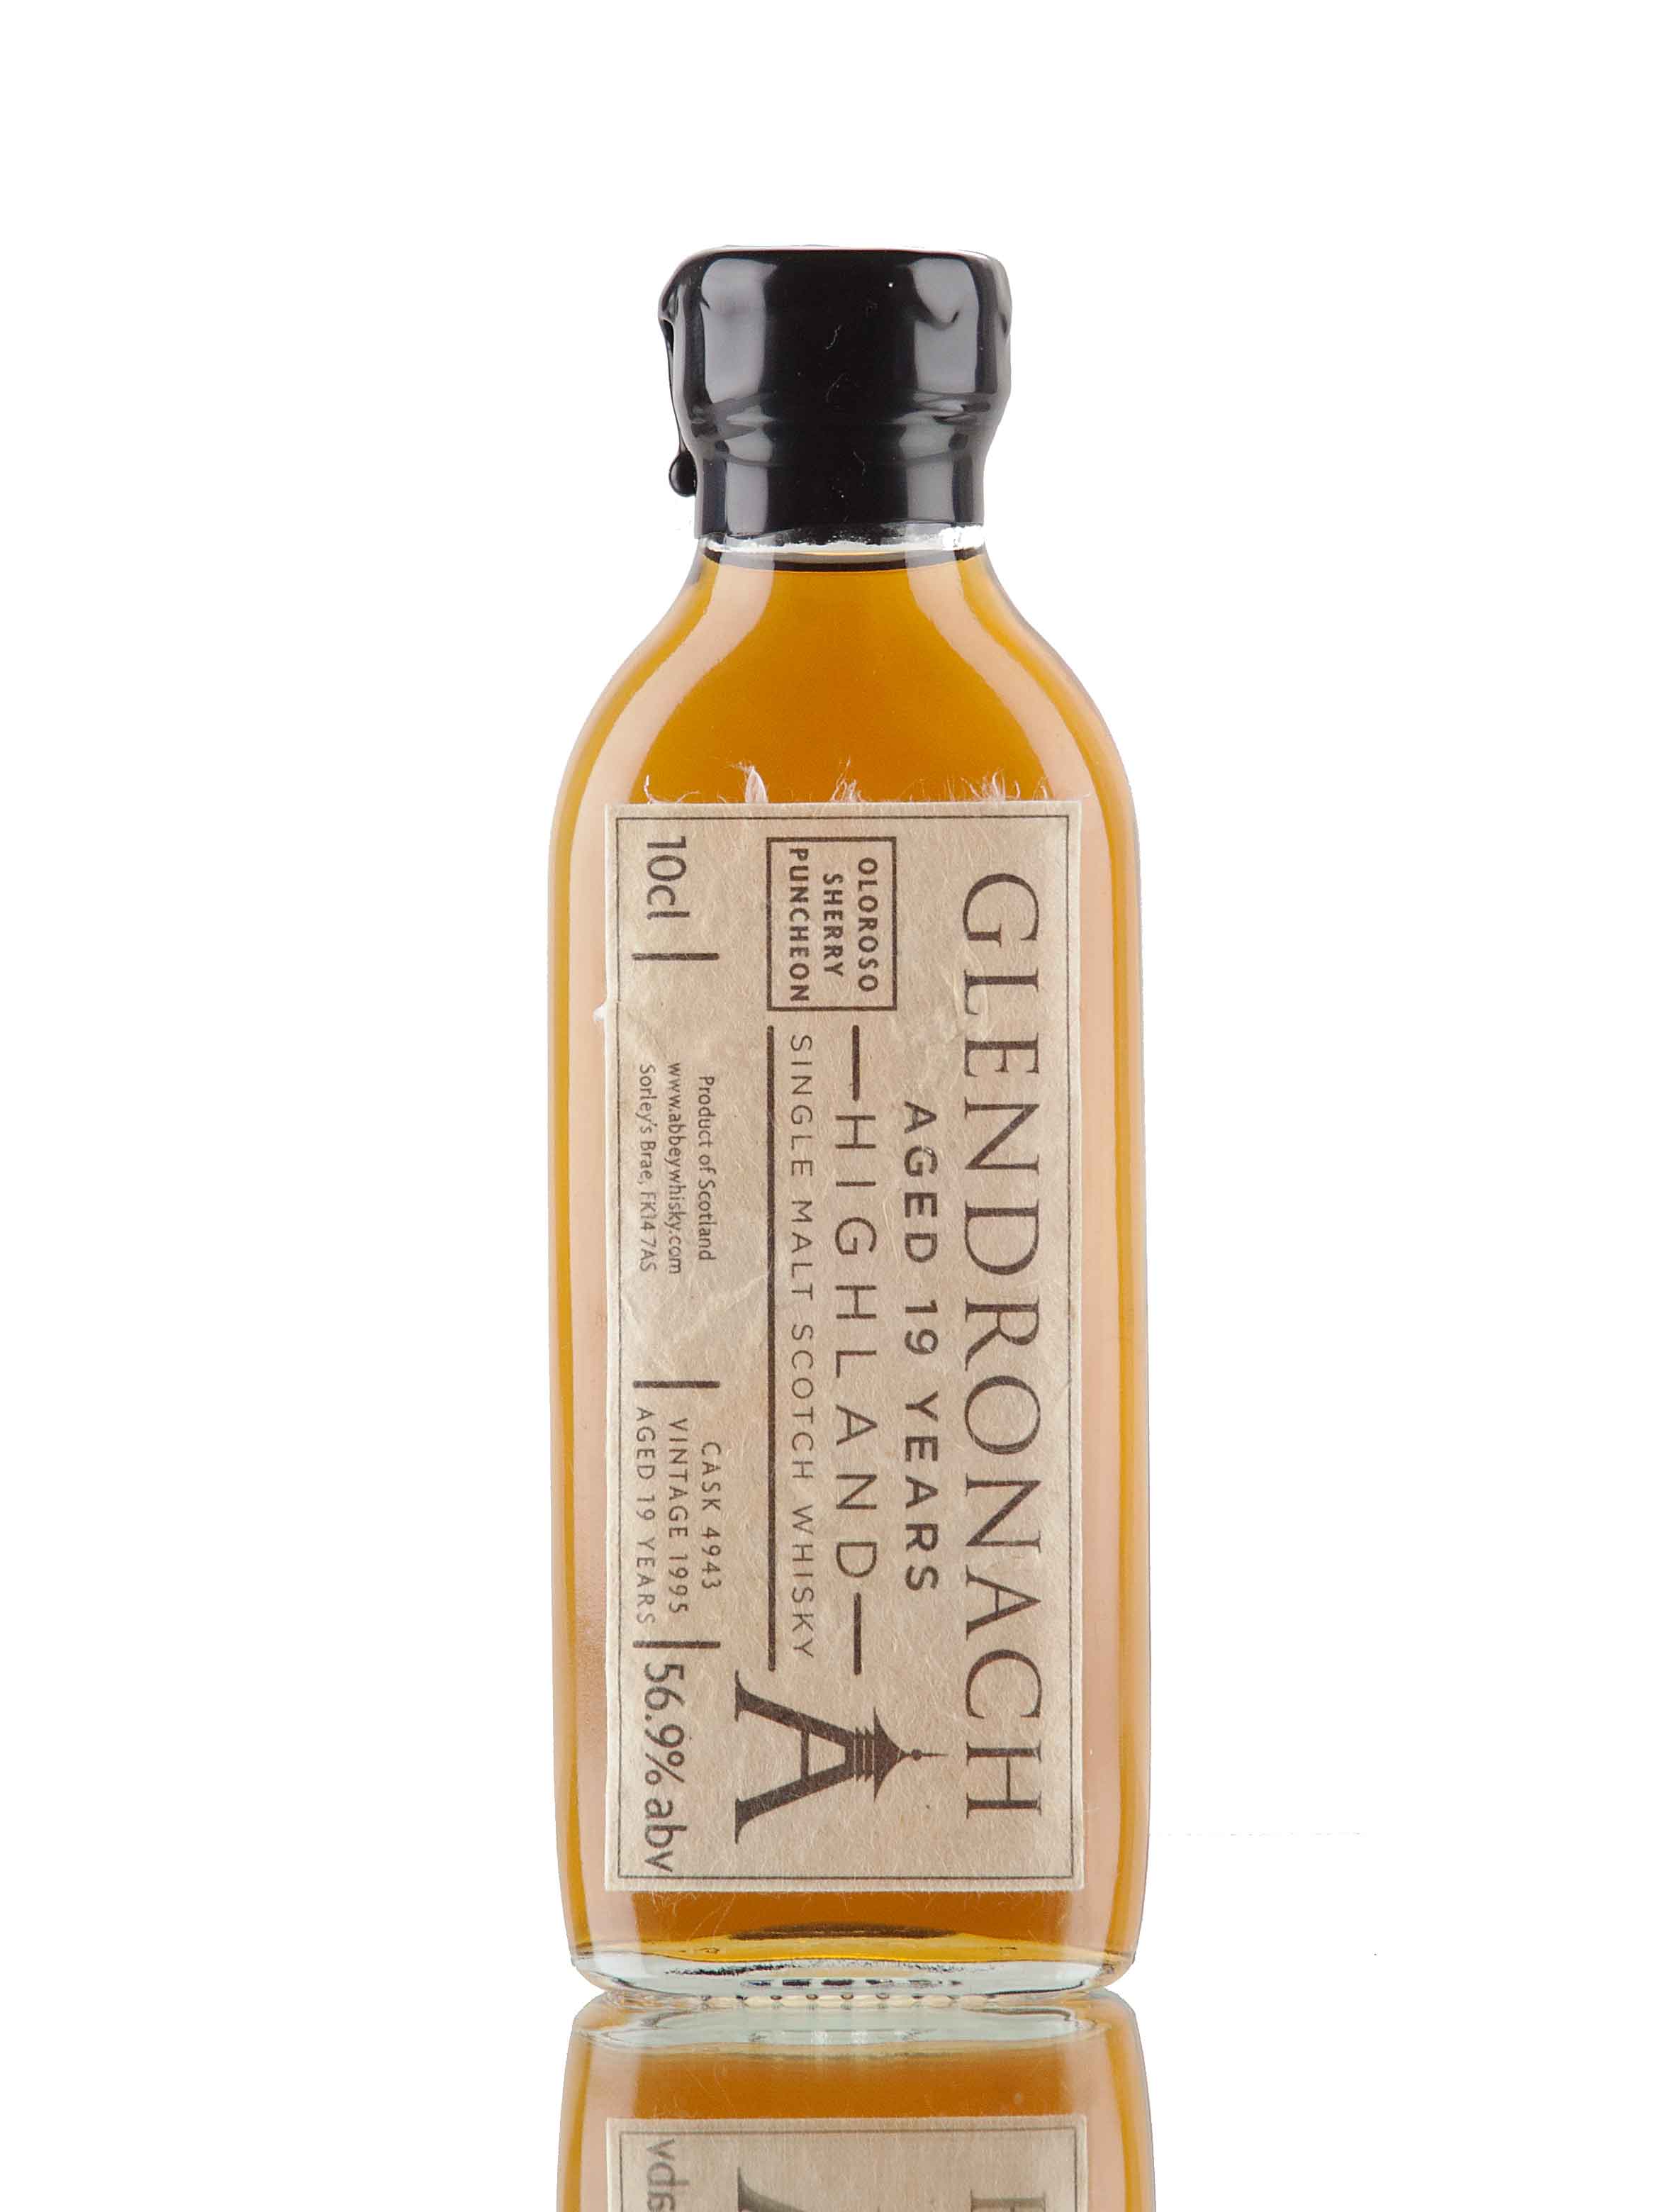 GlenDronach 19 Year Old - 1995 / Cask 4943 / 10cl Sample